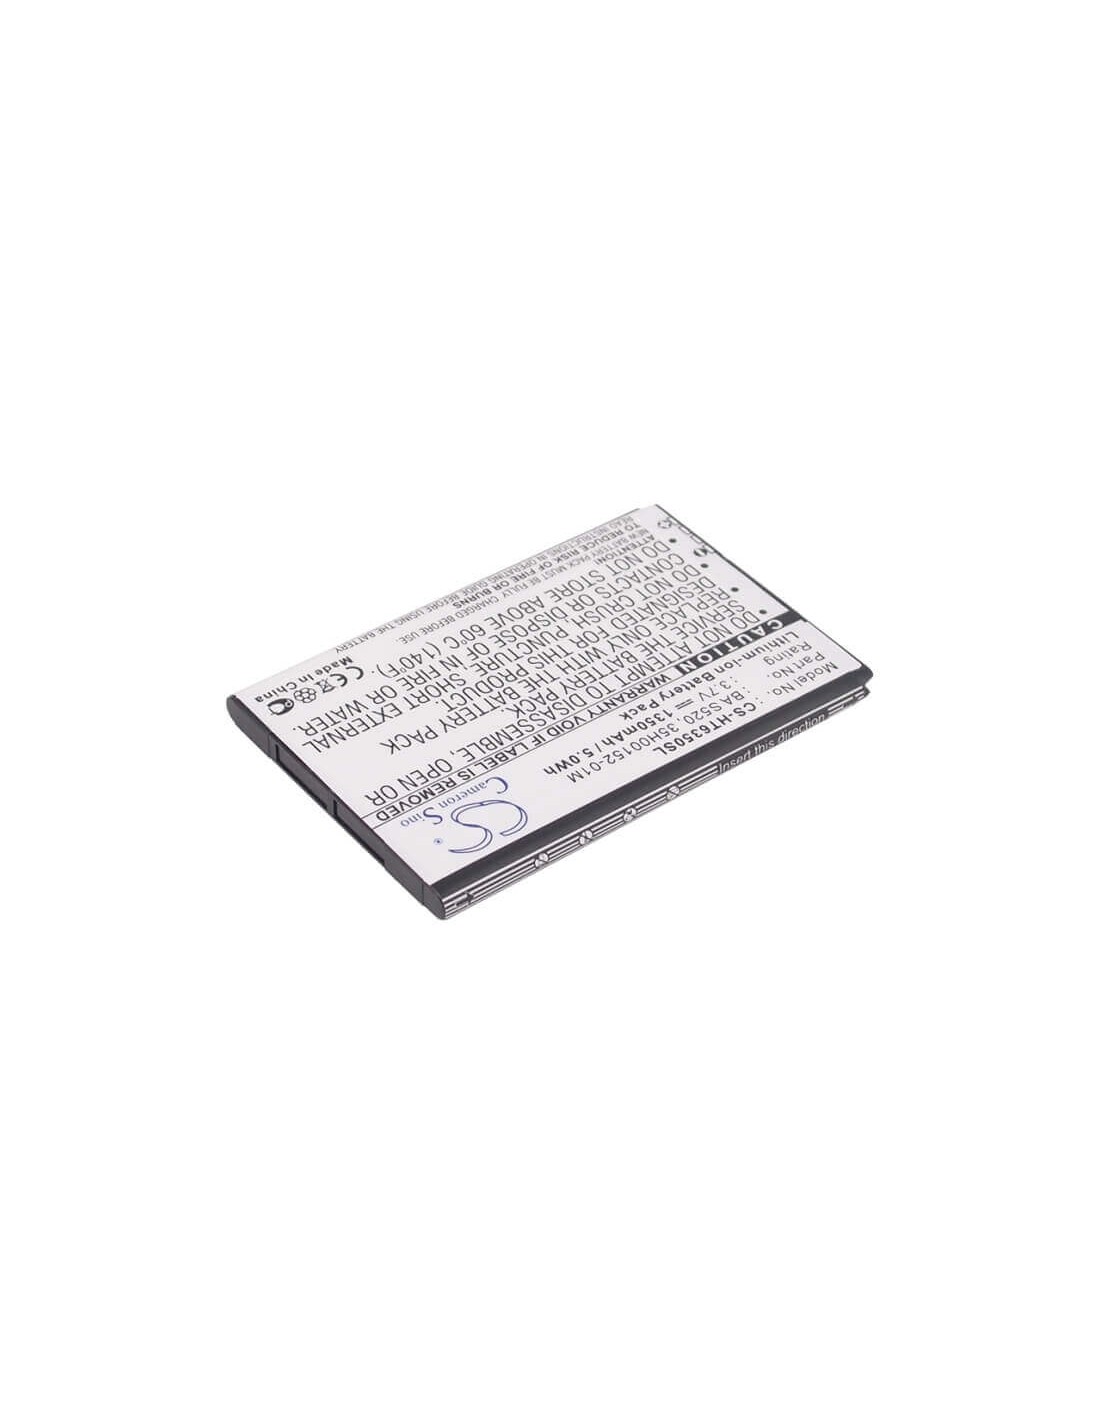 Battery for HTC Droid Incredible 2, Droid Incredible II, ADR6350 3.7V, 1350mAh - 5.00Wh